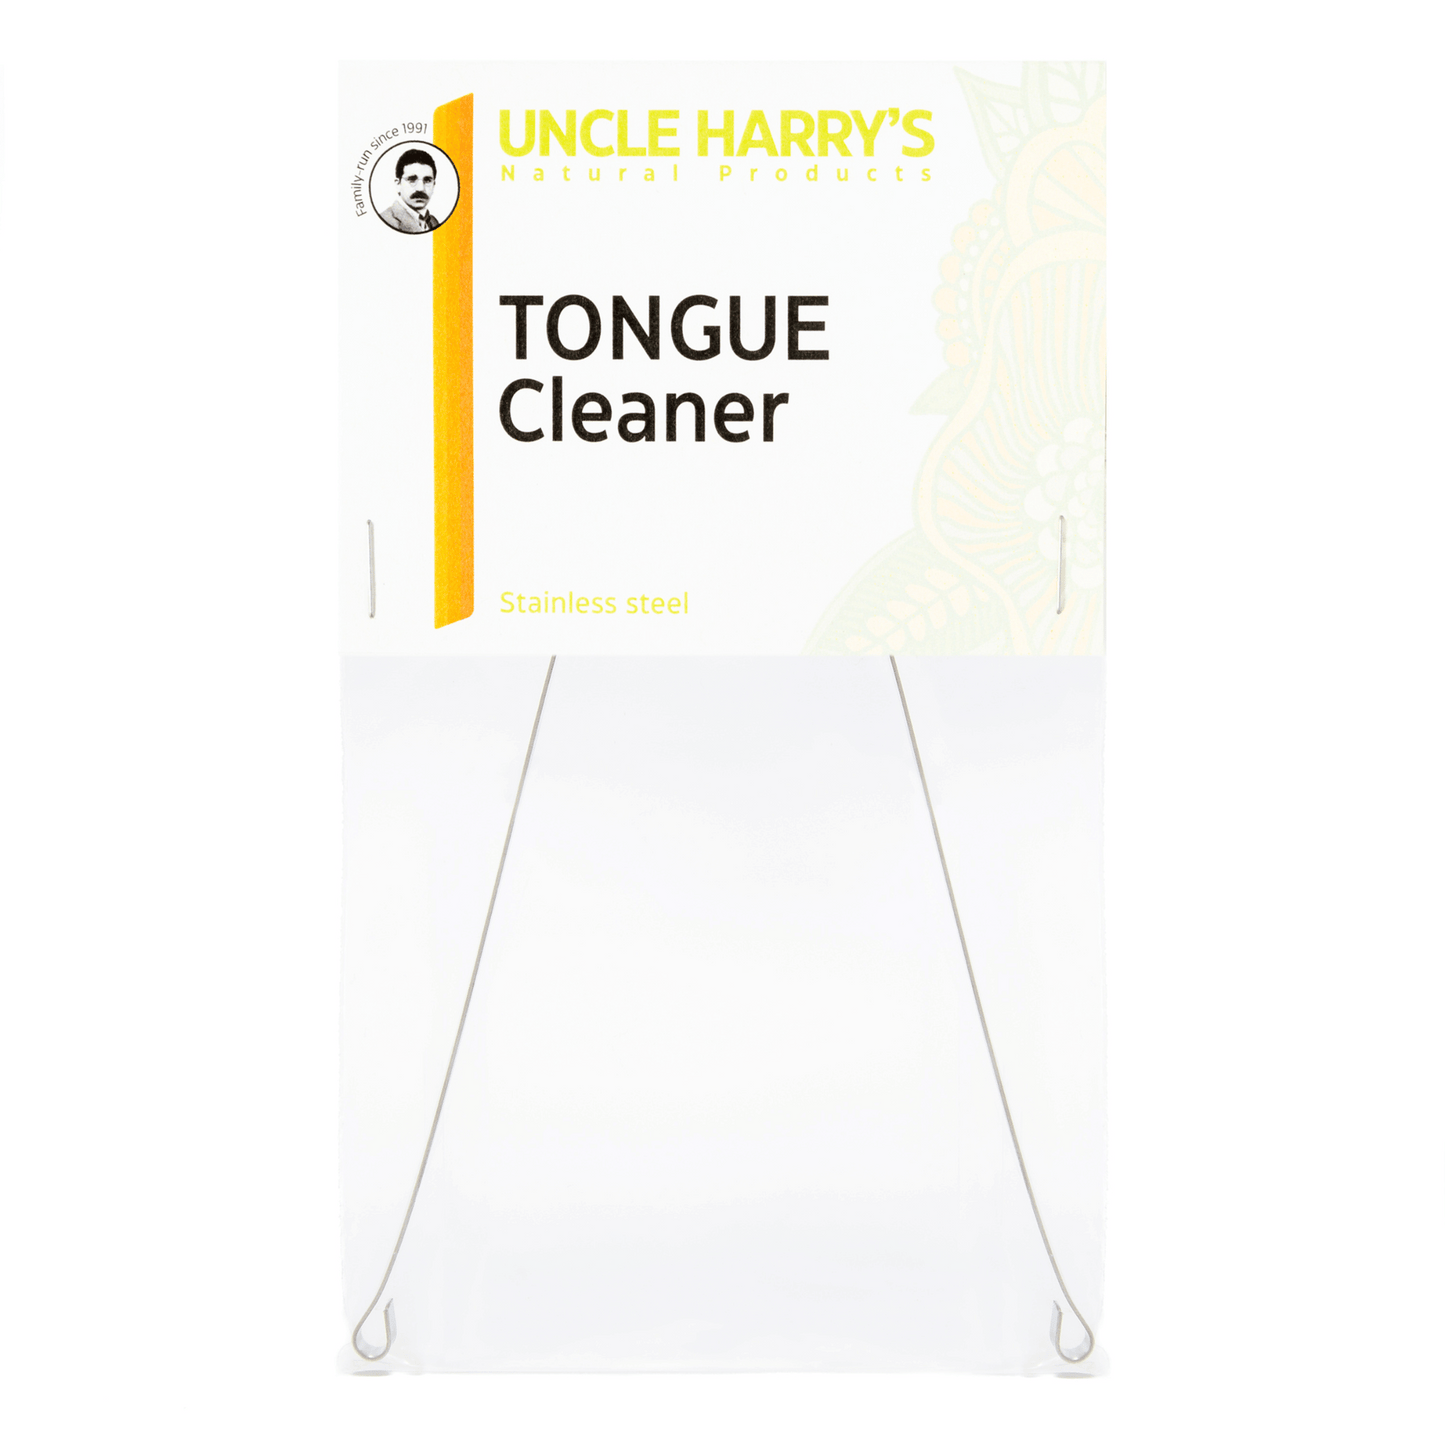 Primary Image of Tongue Cleaner